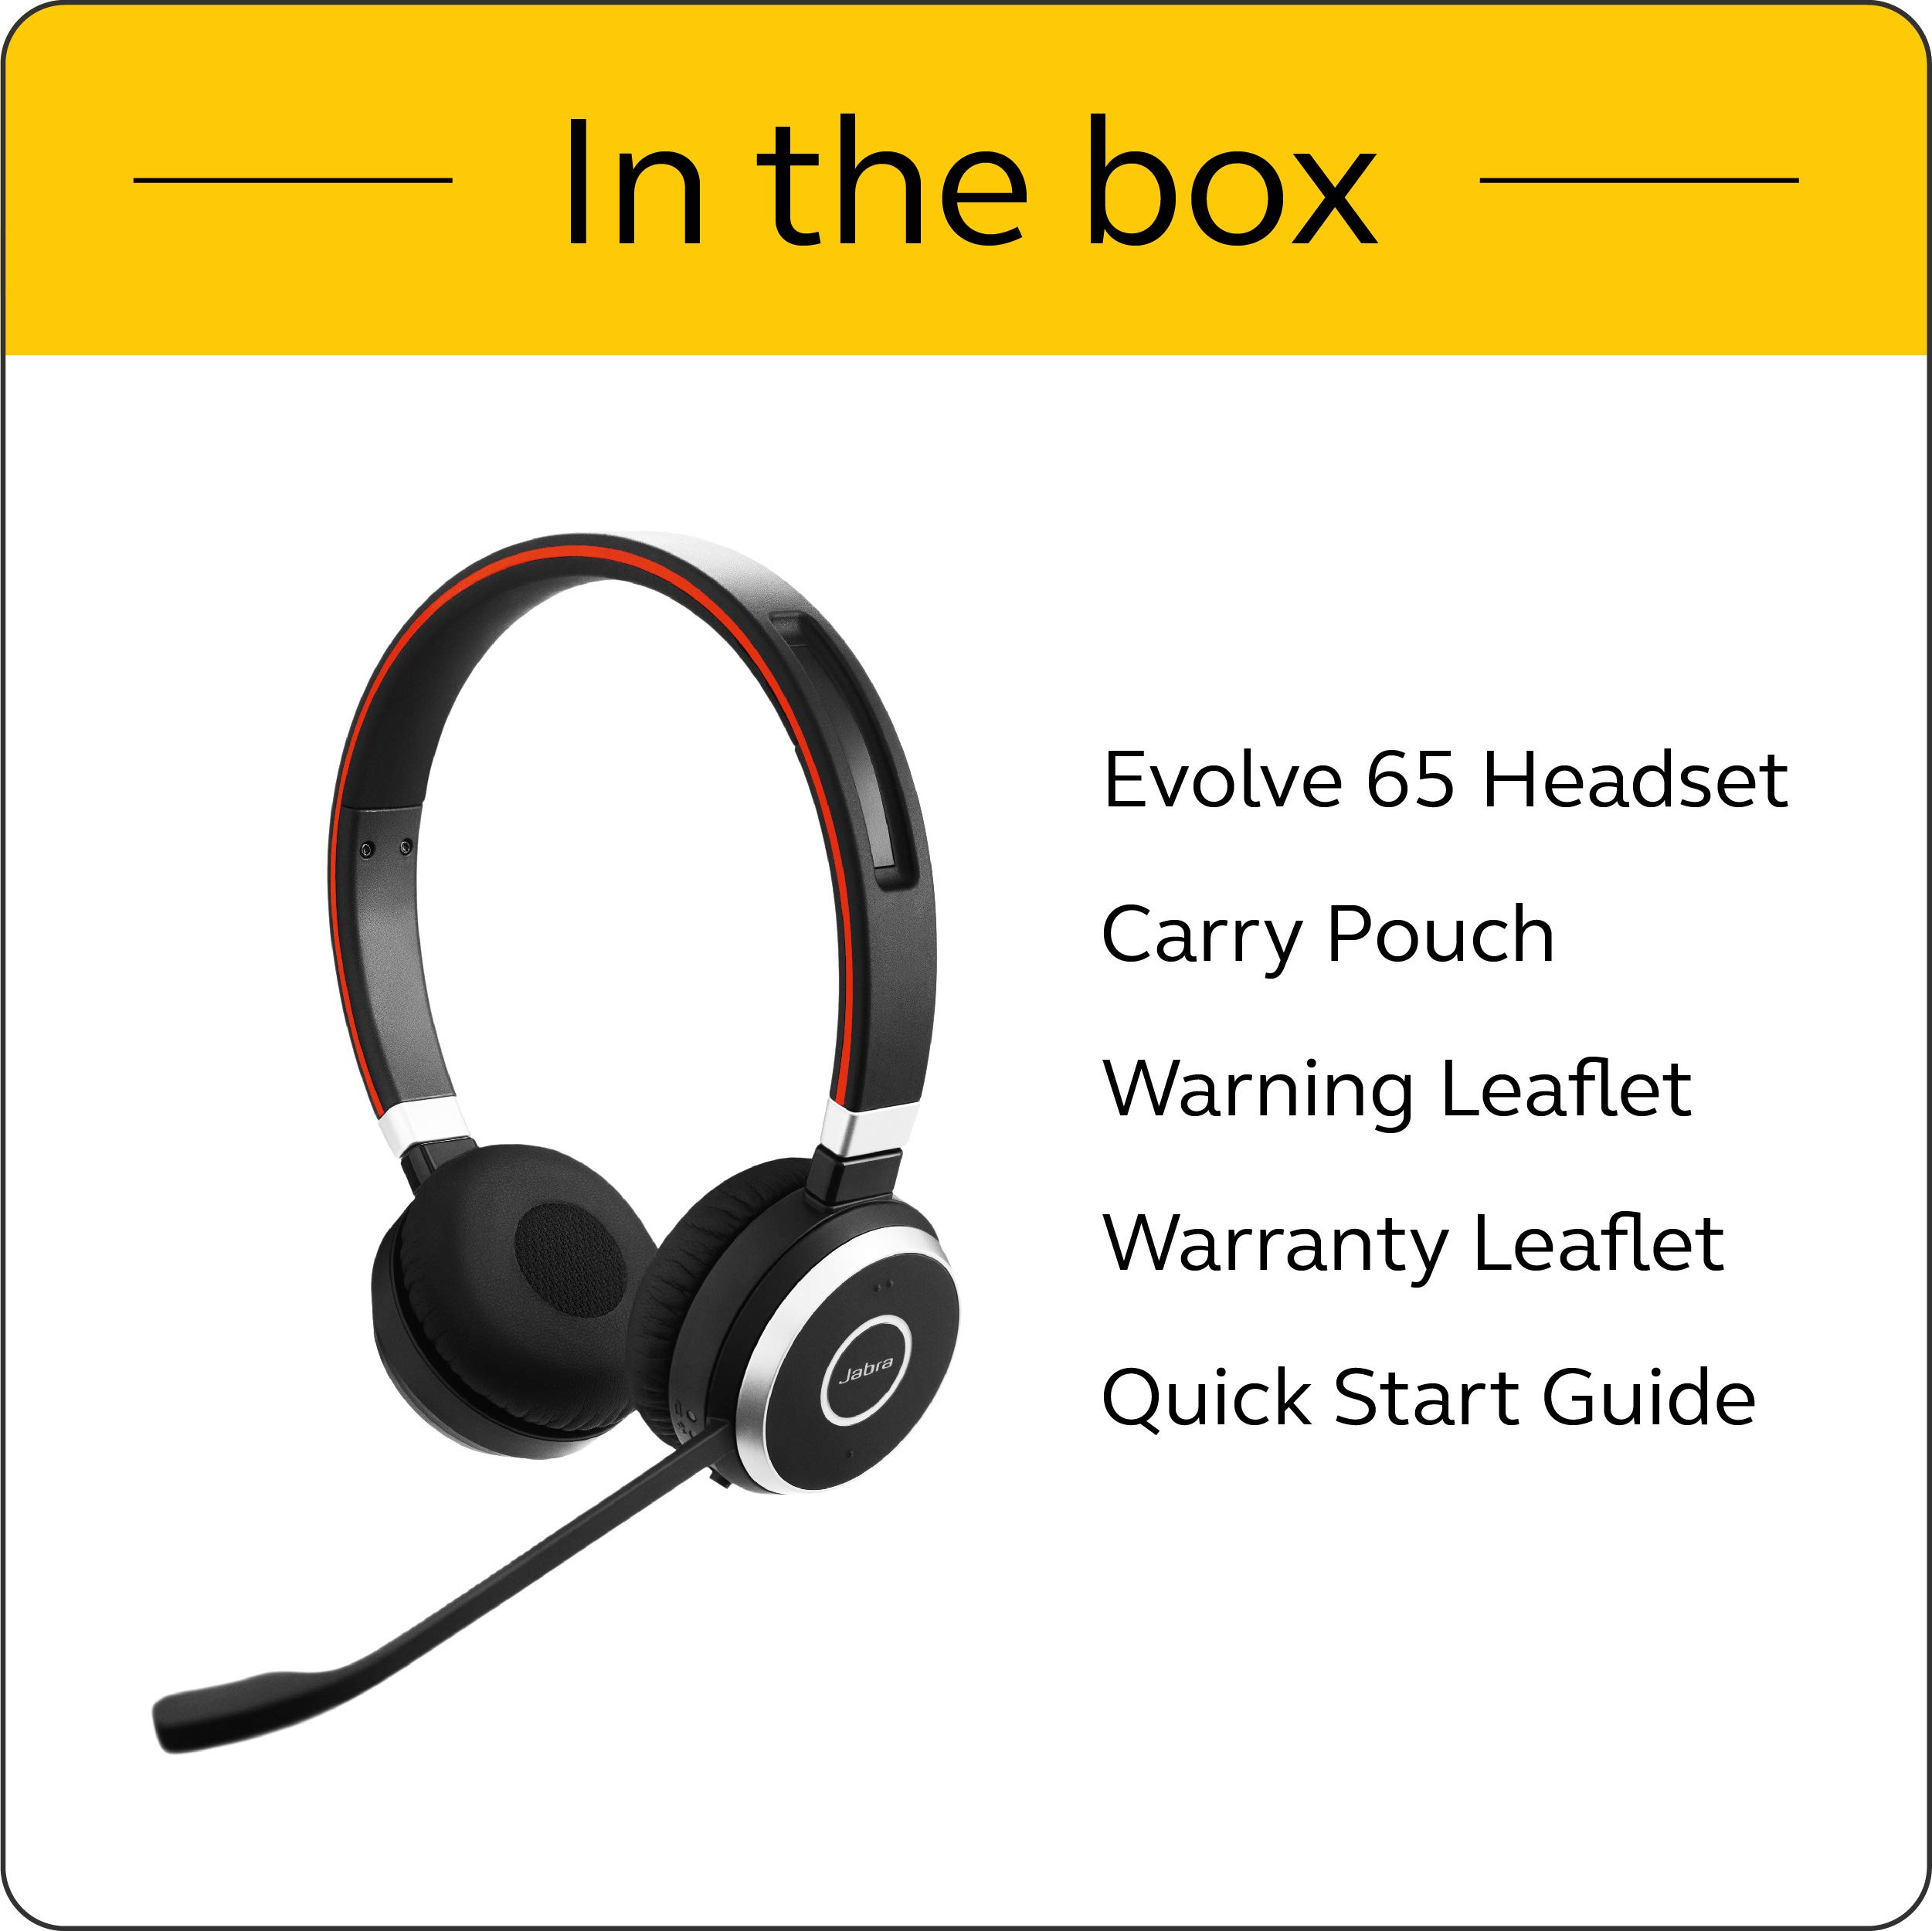 Jabra Evolve 65 UC Stereo – Includes Link 370 USB Adapter – Bluetooth Headset with Industry-Leading Wireless Performance, Passive Noise Cancellation, All Day Battery, Stereo Speaker, Model: 6599-829-409